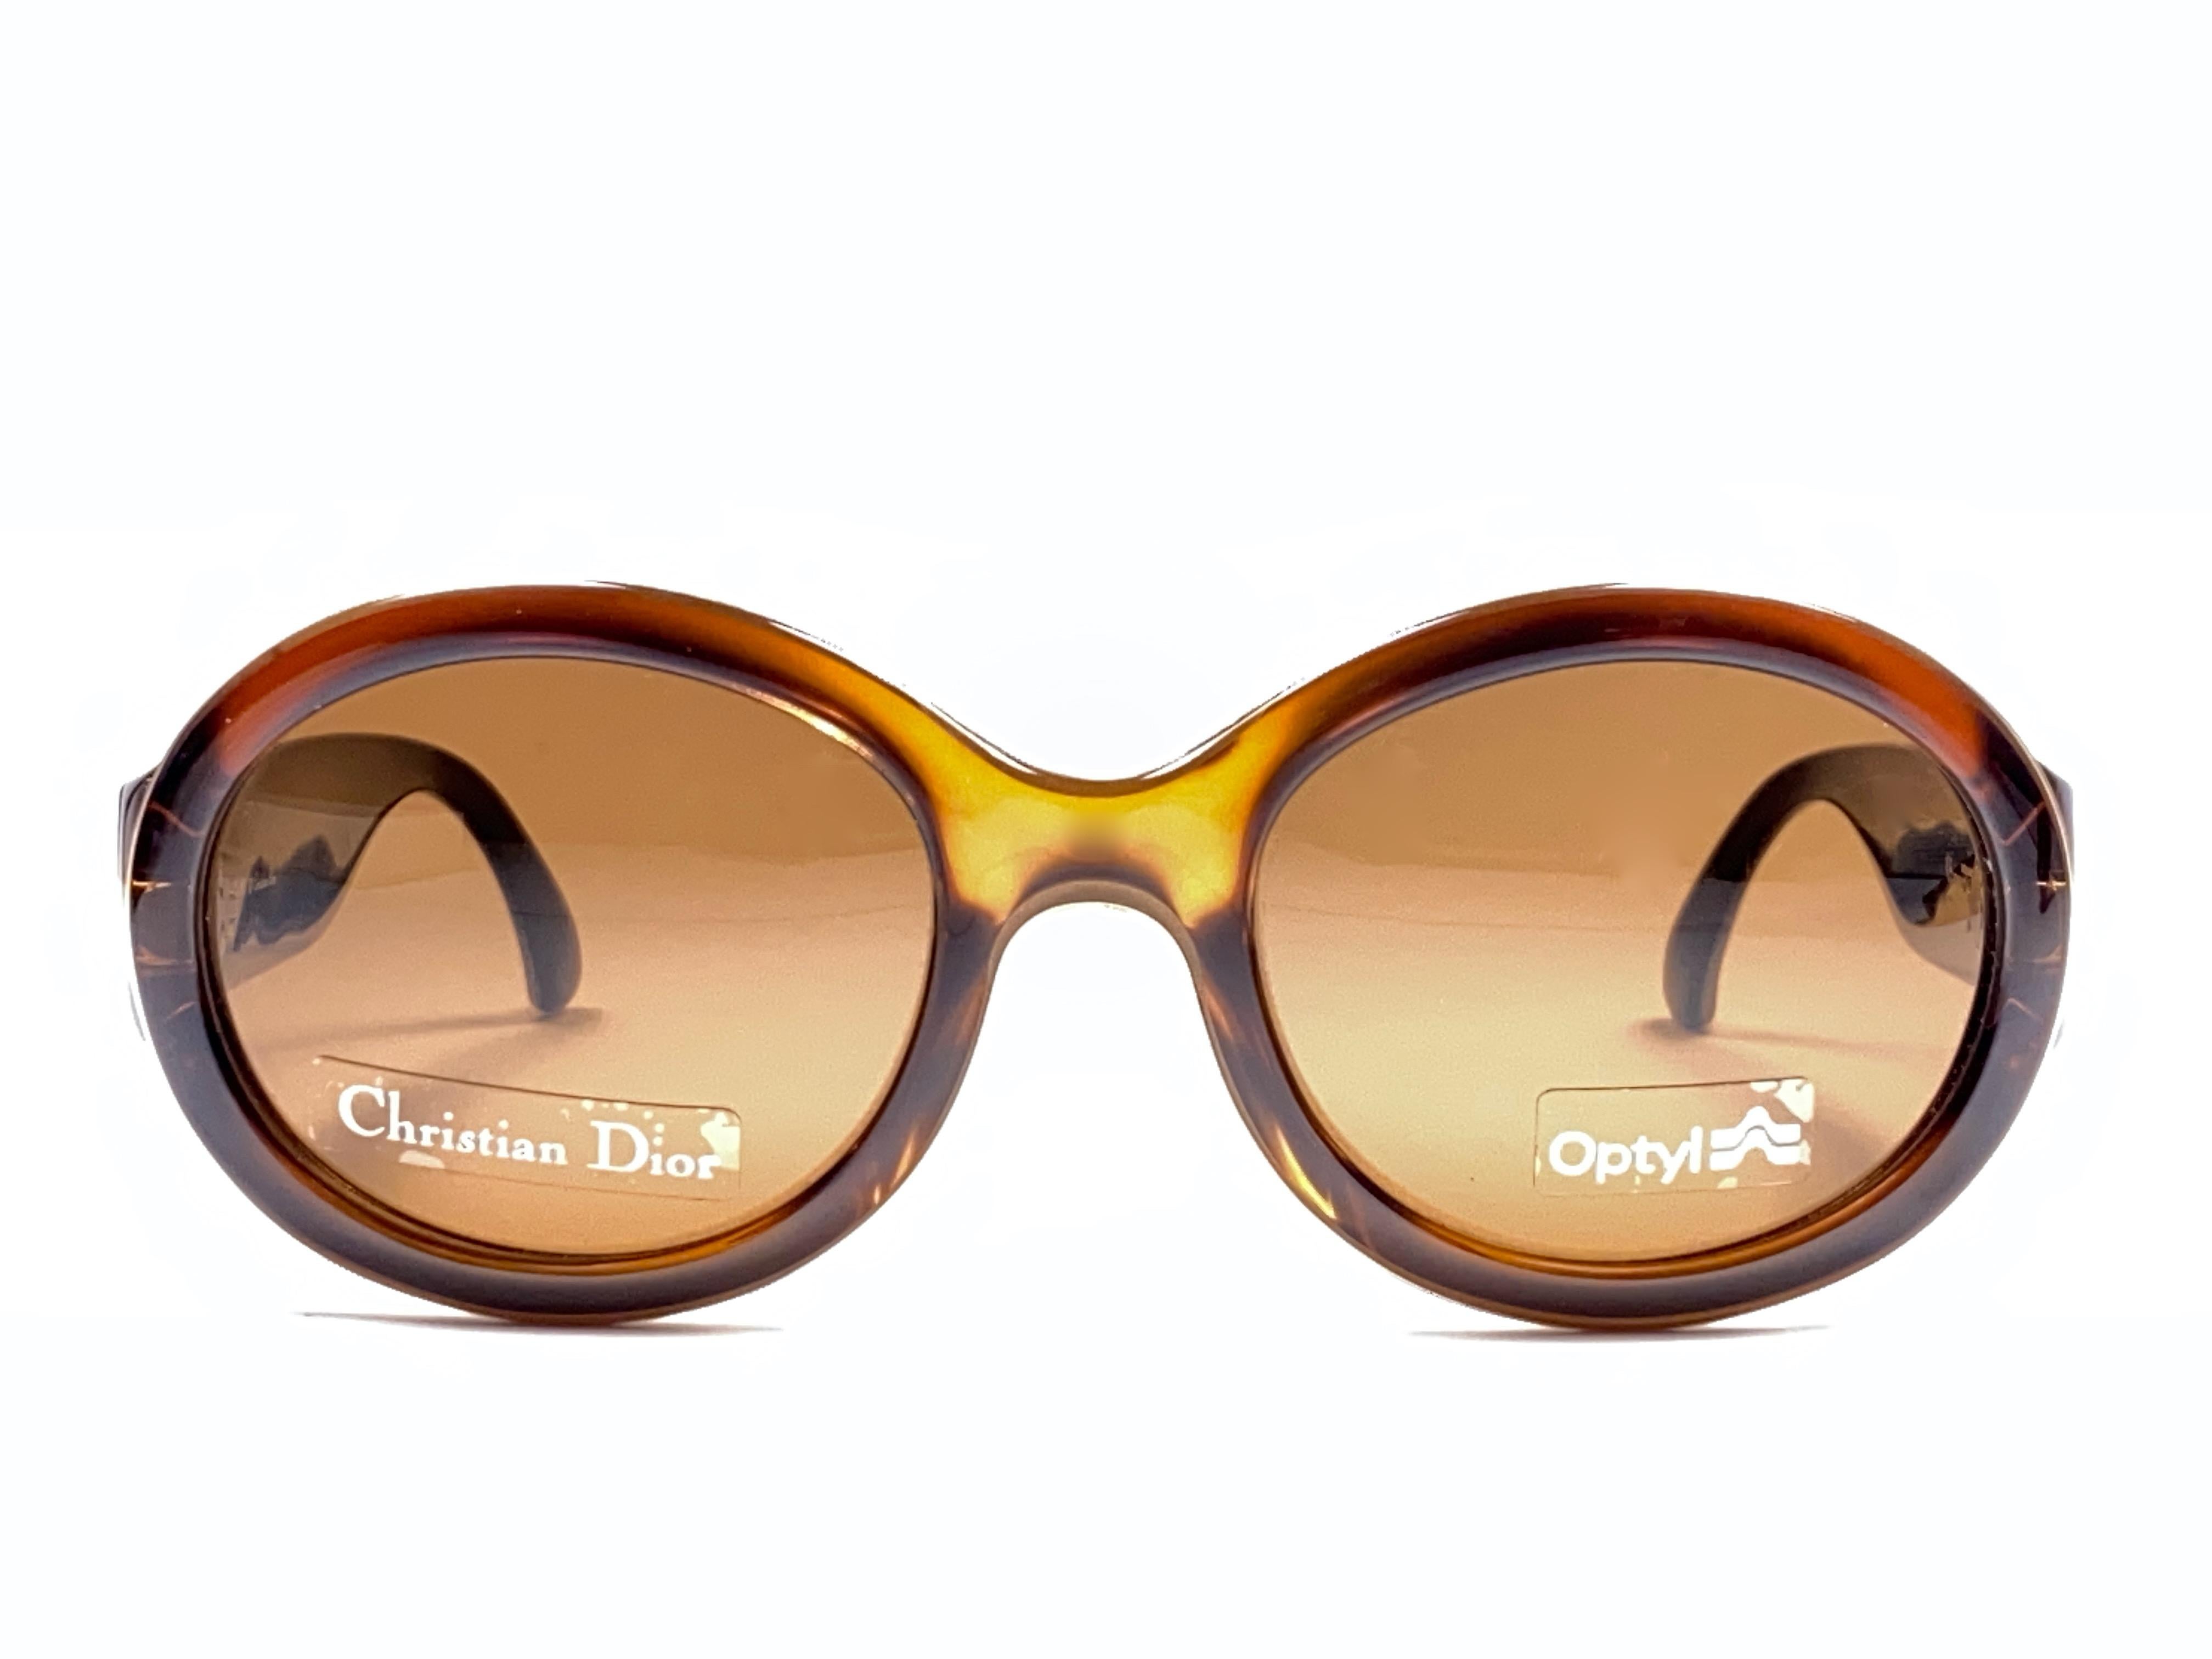 New vintage Christian Dior amber & gold sunglasses. .

Spotless brown lenses.
New, never worn or displayed this item may show light sign of wear due to storage.

Made in Austria

MEASUREMENTS

FRONT : 14 CMS

LENS HEIGHT : 4.4 CMS

LENS WIDTH : 5